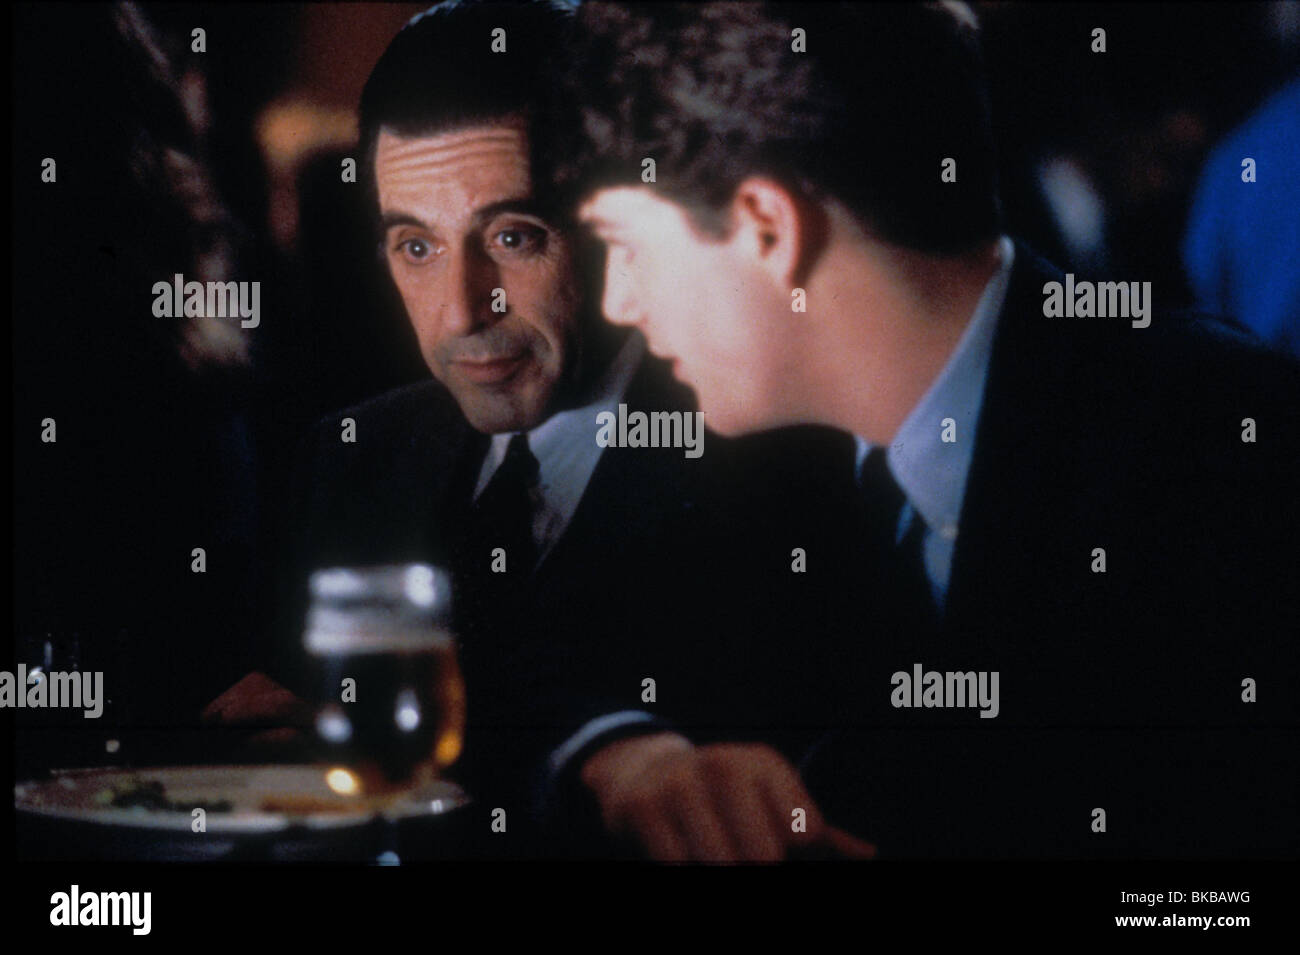 SCENT OF A WOMAN (1992) AL PACINO, CHRIS O'DONNELL SCW 001 Stock Photo